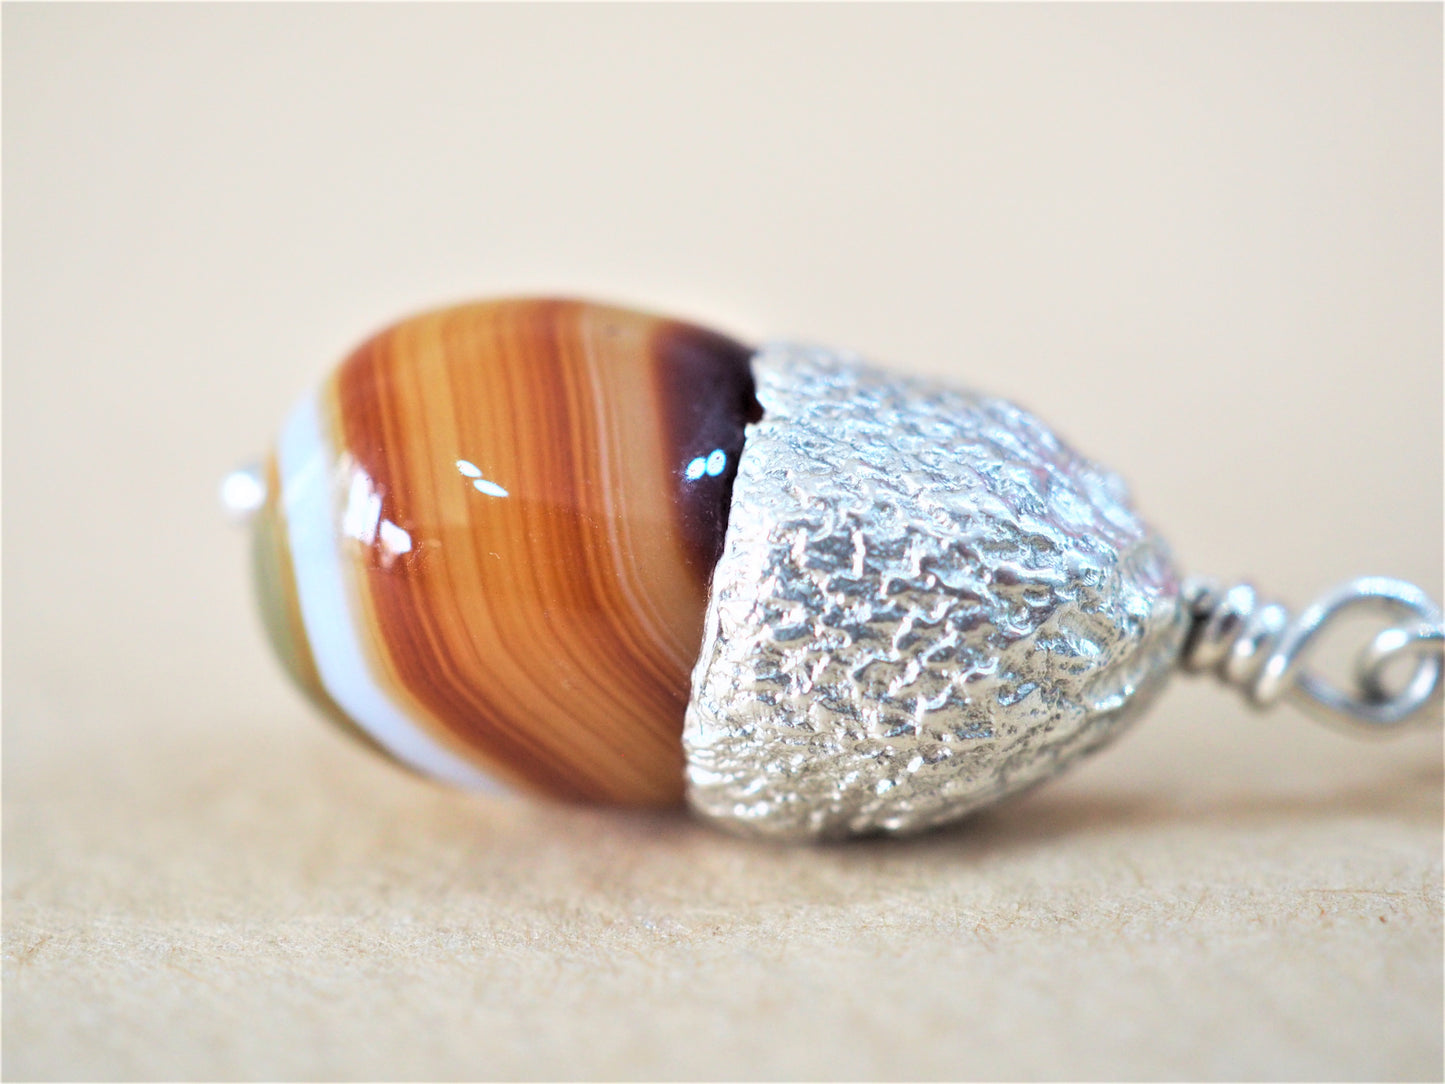 High, Charlie - Agate and Silver Acorn Pendant